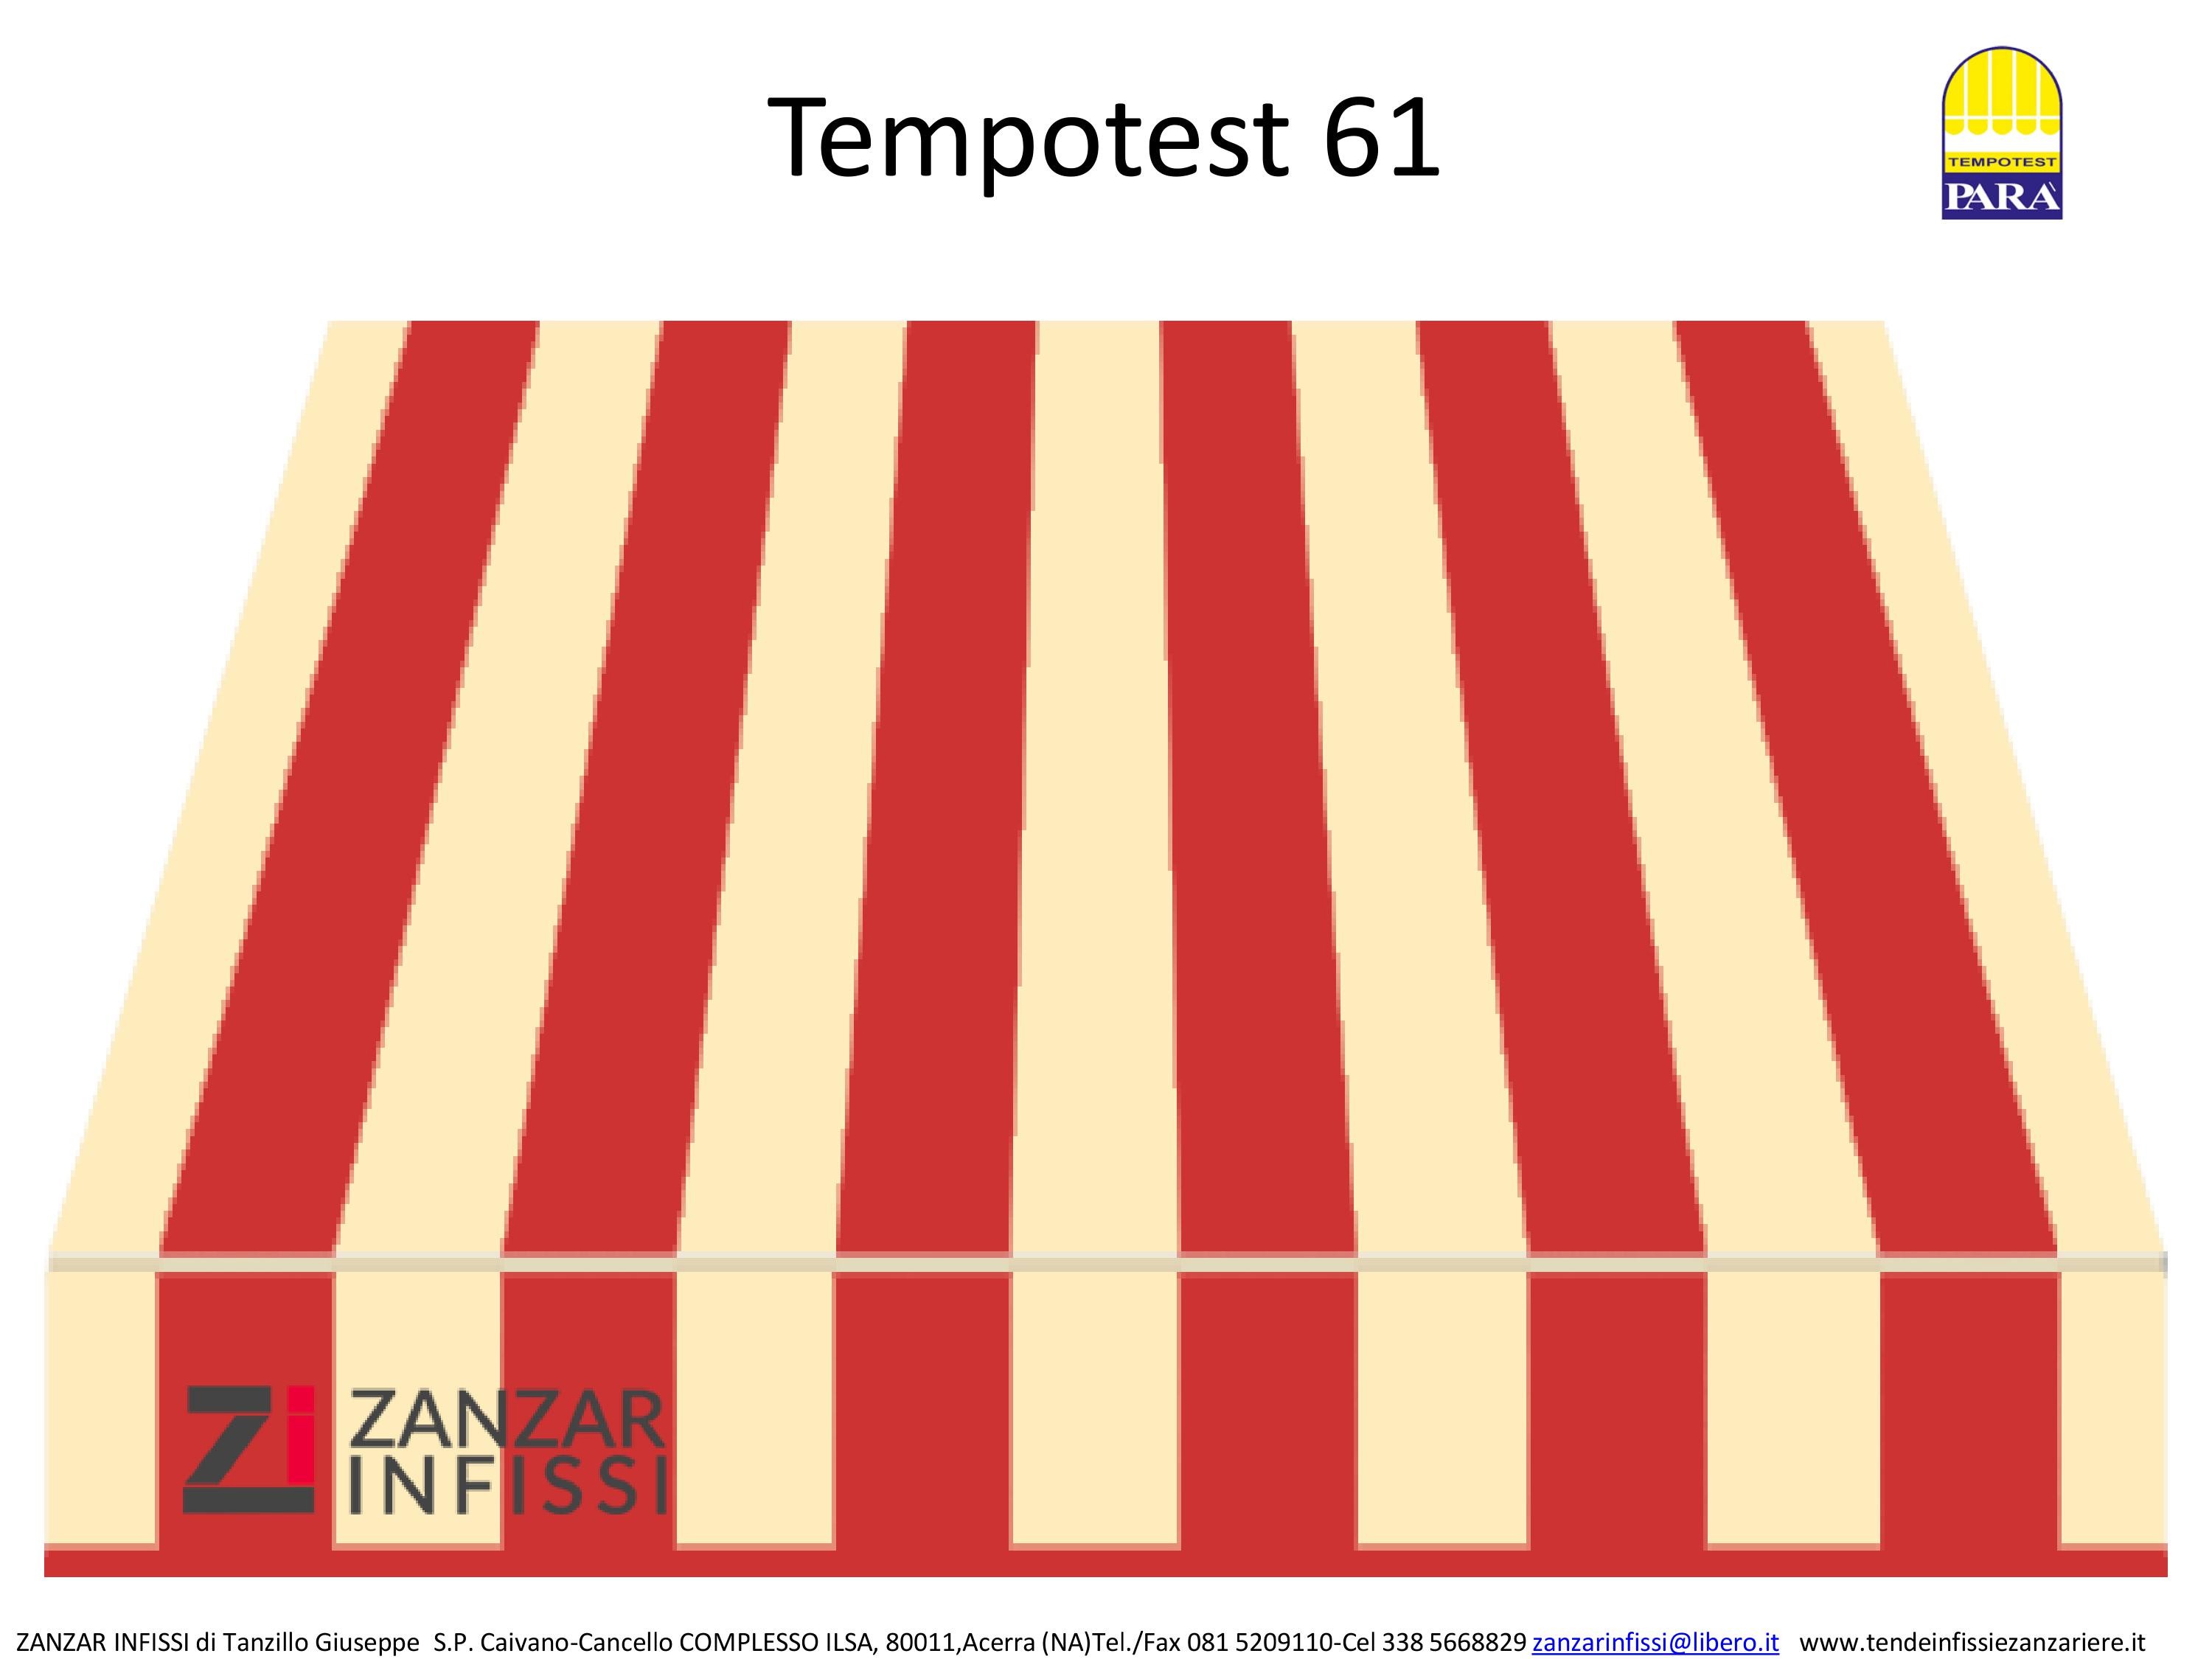 Tempotest 61